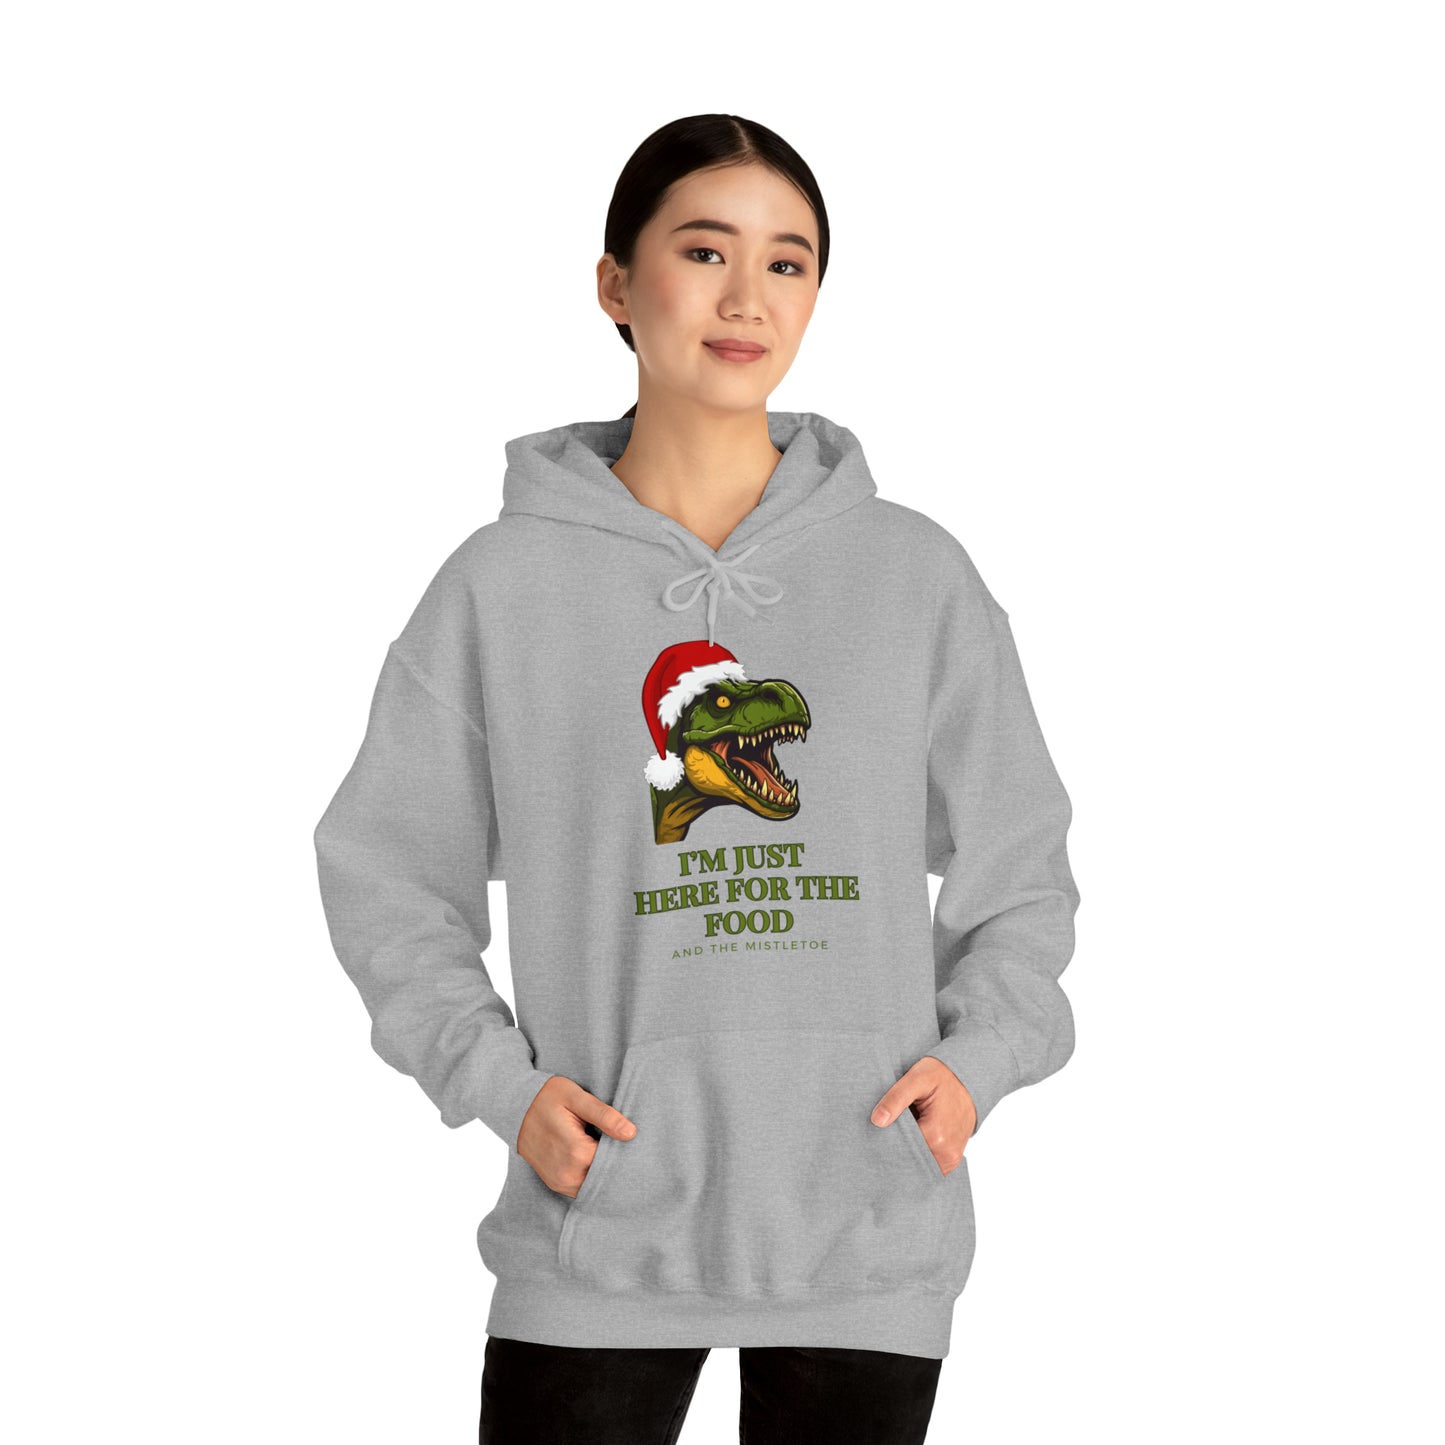 I'm Just Here For The Food And Mistletoe Unisex Heavy Blend™ Hooded Sweatshirt